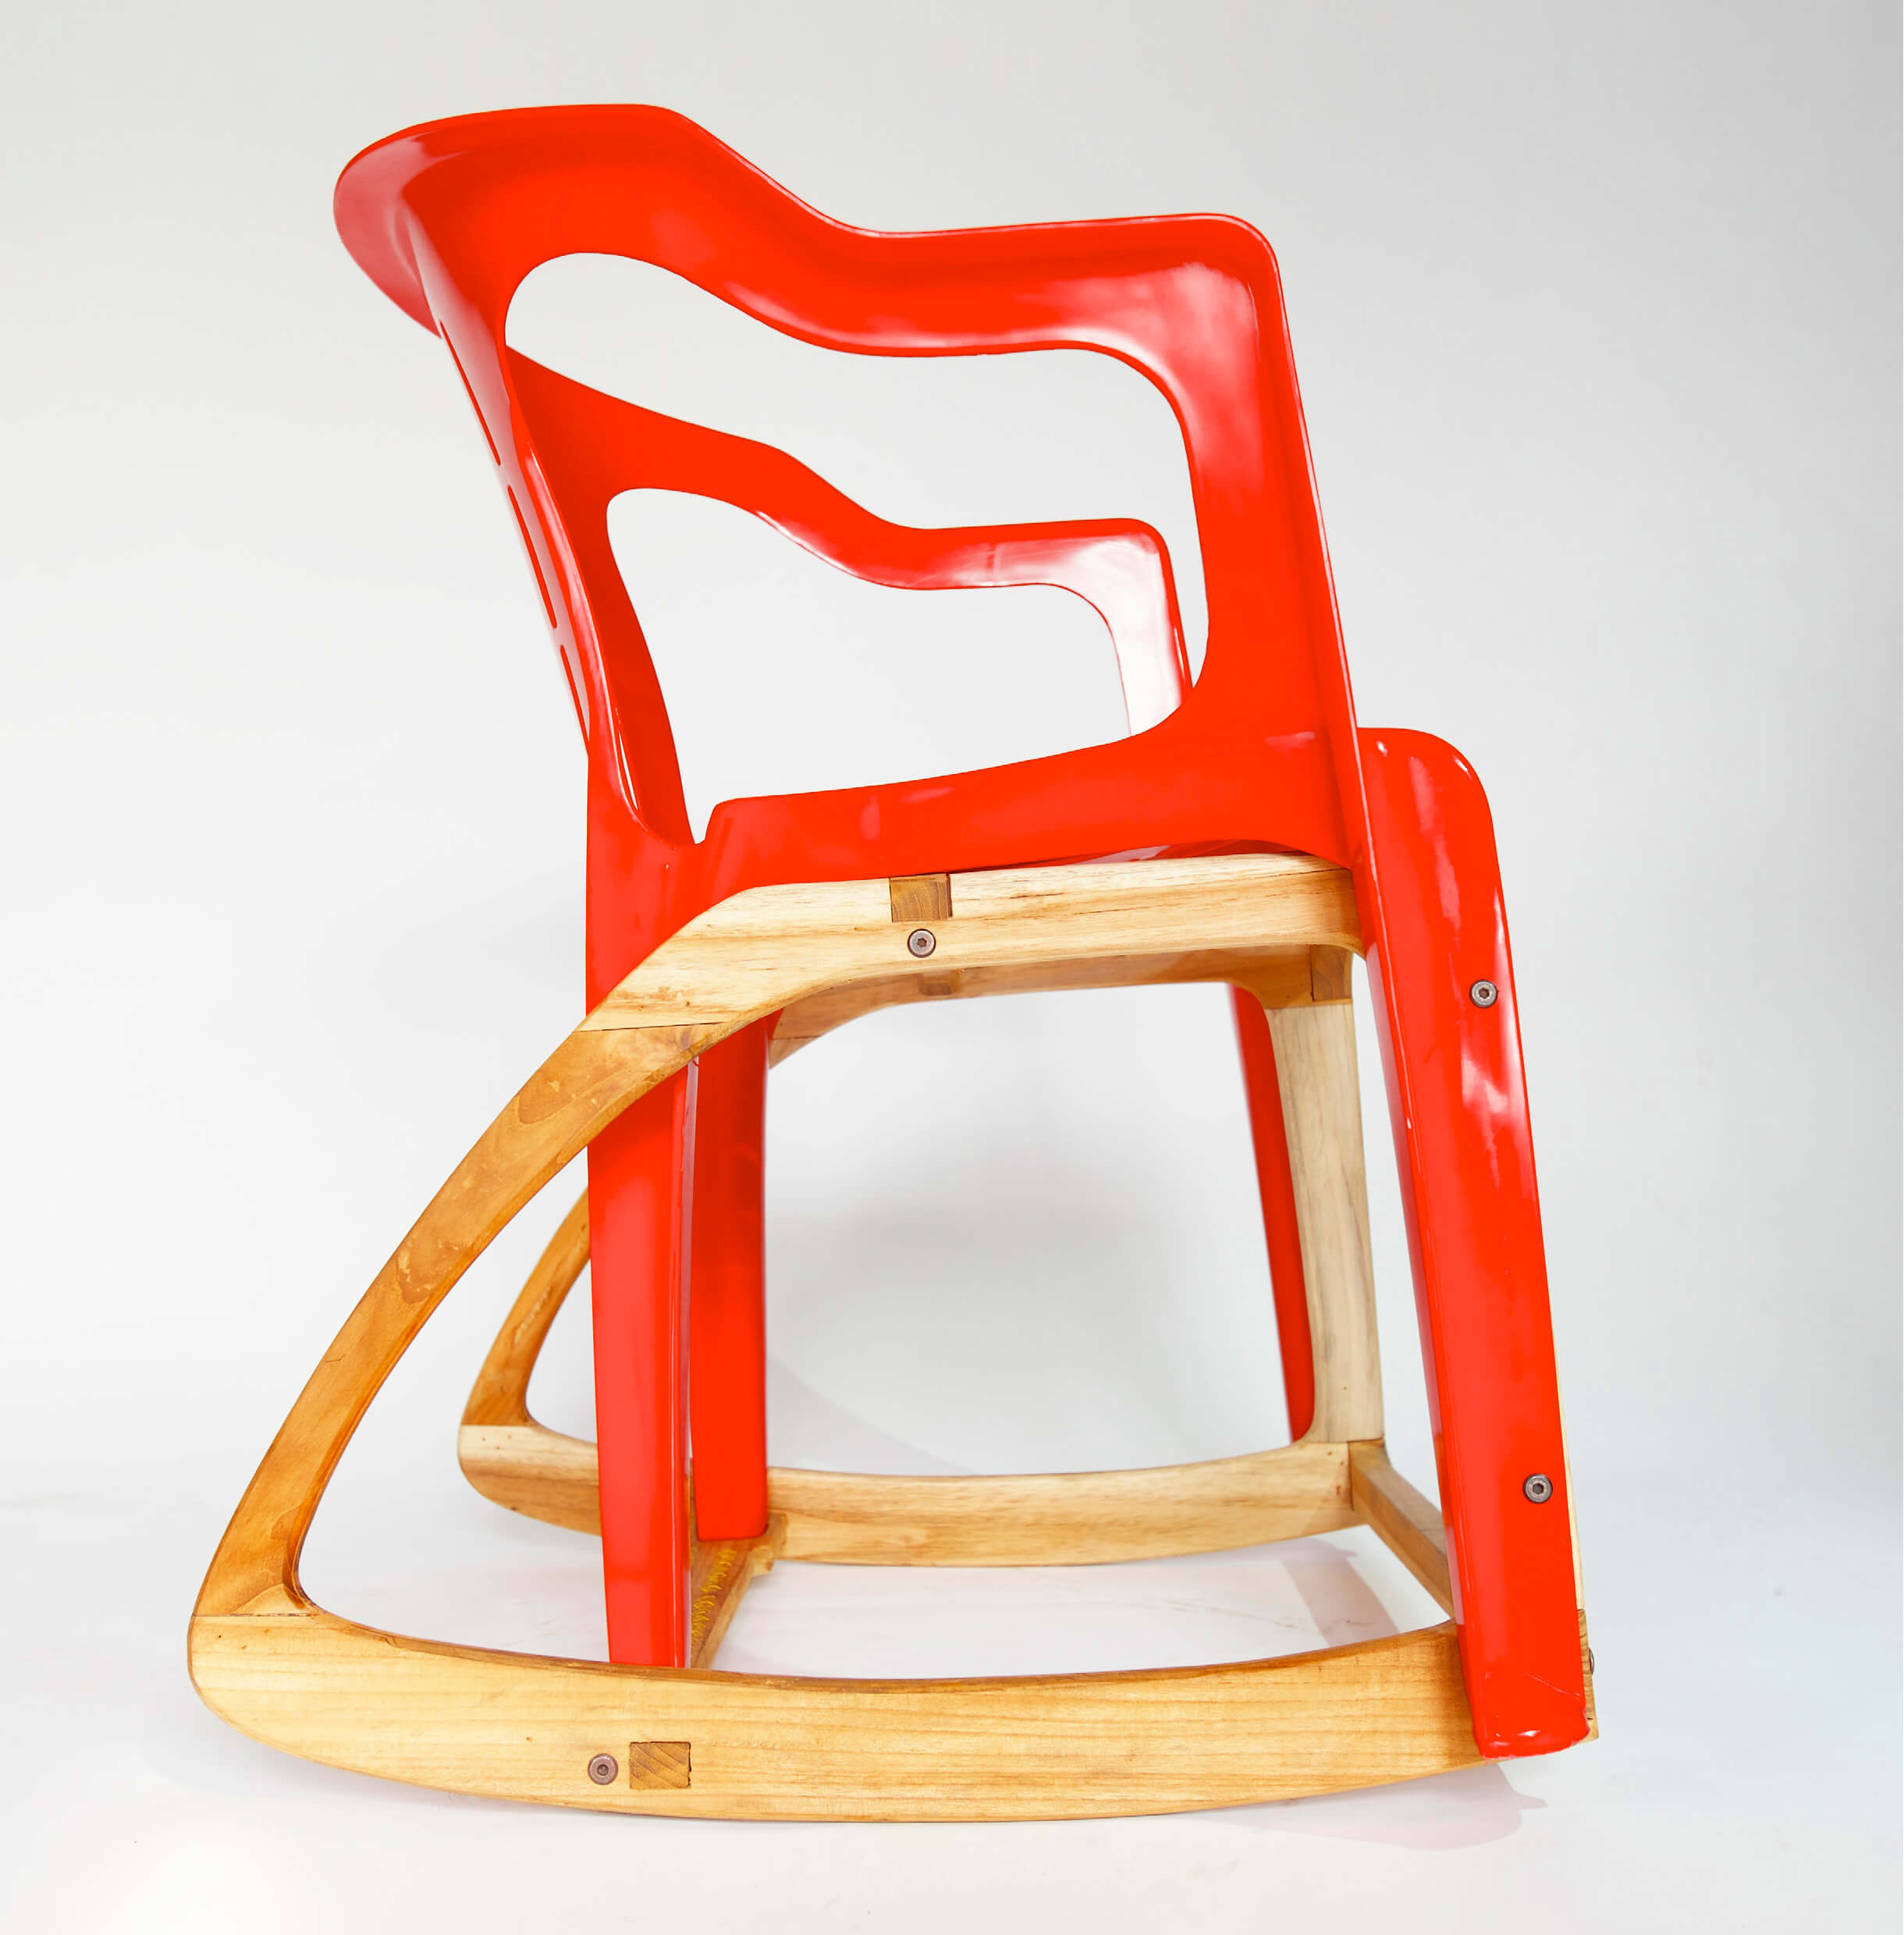 The Bar Roker Chair by Rodney Glick